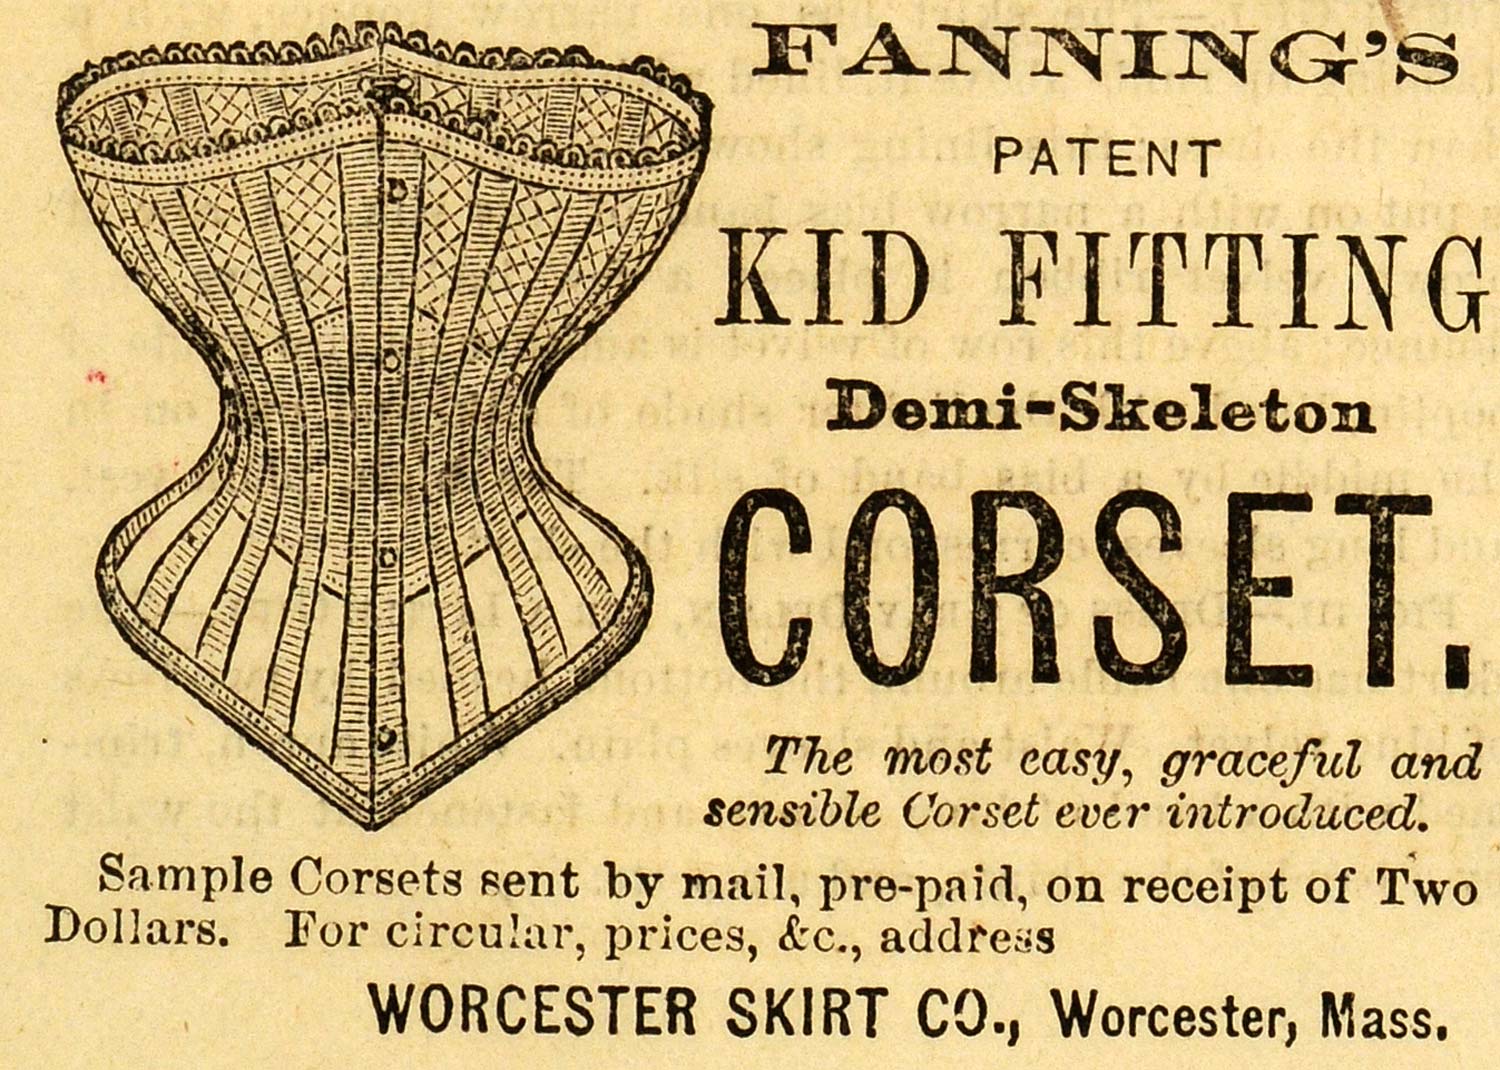 1909 Ad Royal Worcester Corset Chest Clothing Accessories